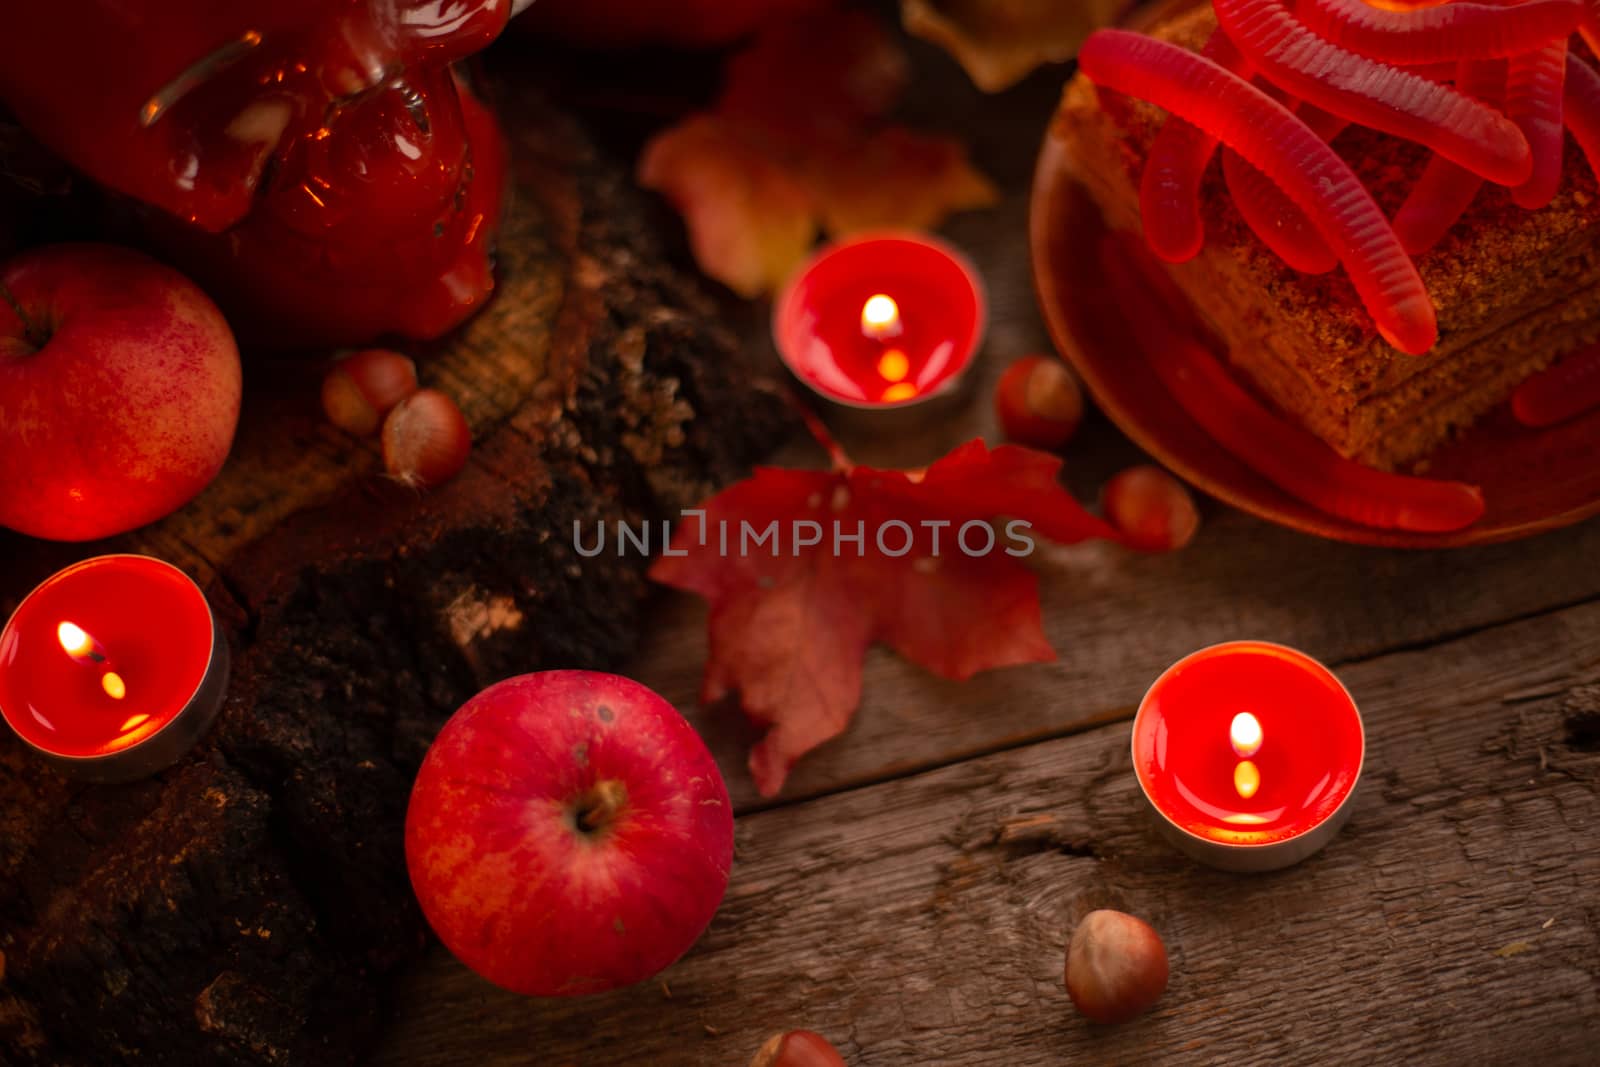 Halloween food still life abstract background with pumpkins, apples, cake, gummy worms, skull red drink and candles